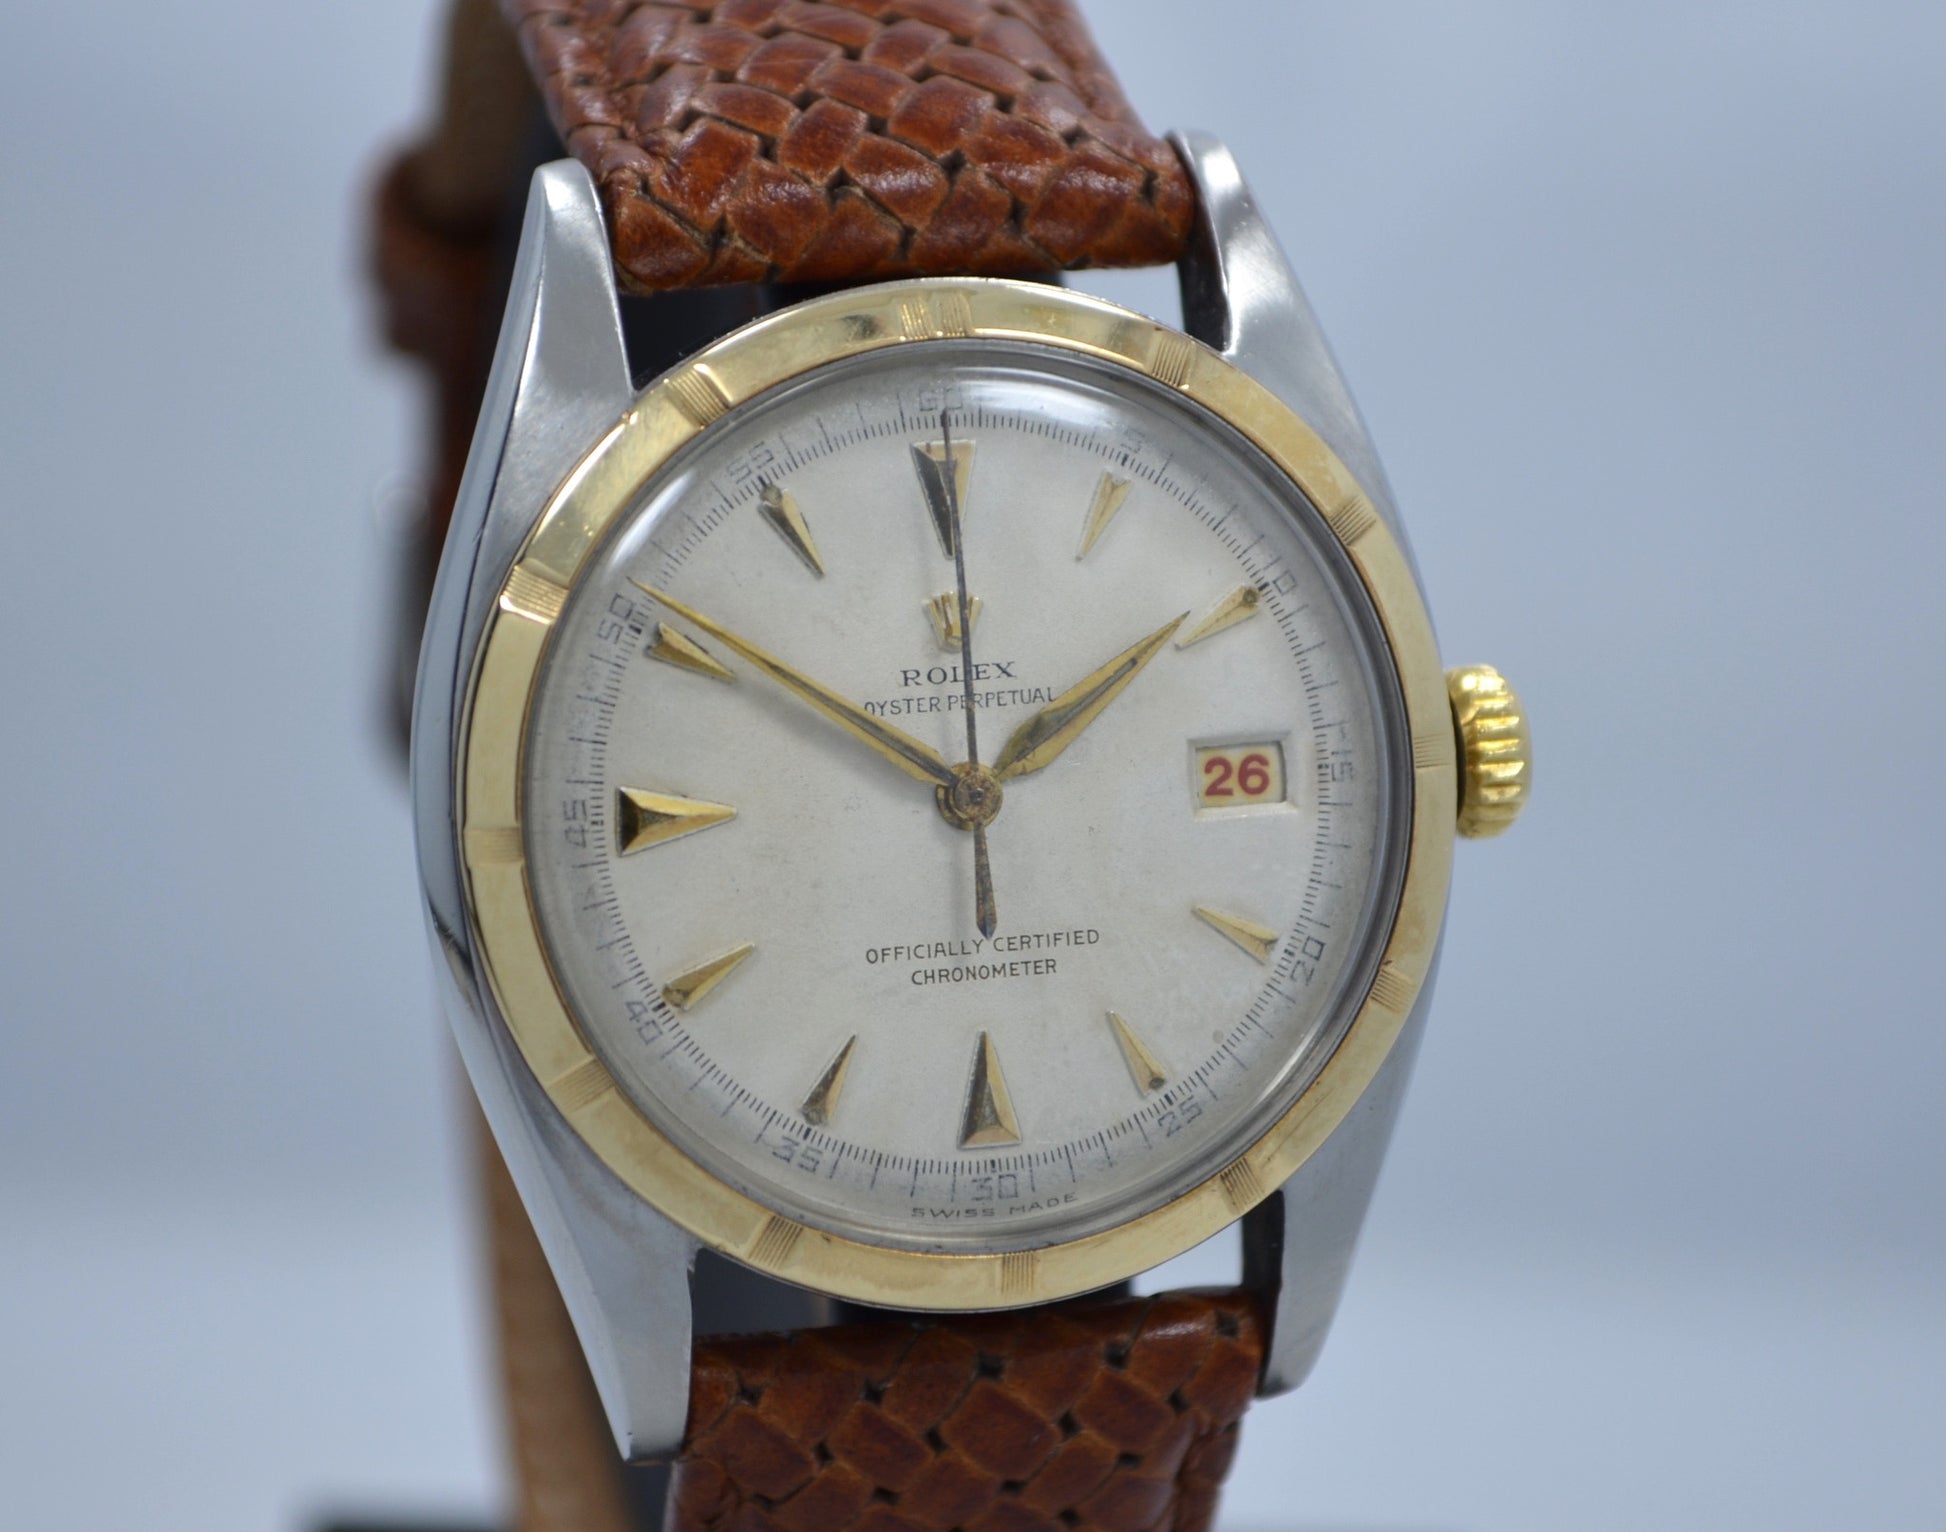 Vintage Rolex 6105 Oyster Perpetual 18K Gold Steel Red Date Automatic 1950 Watch - Hashtag Watch Company